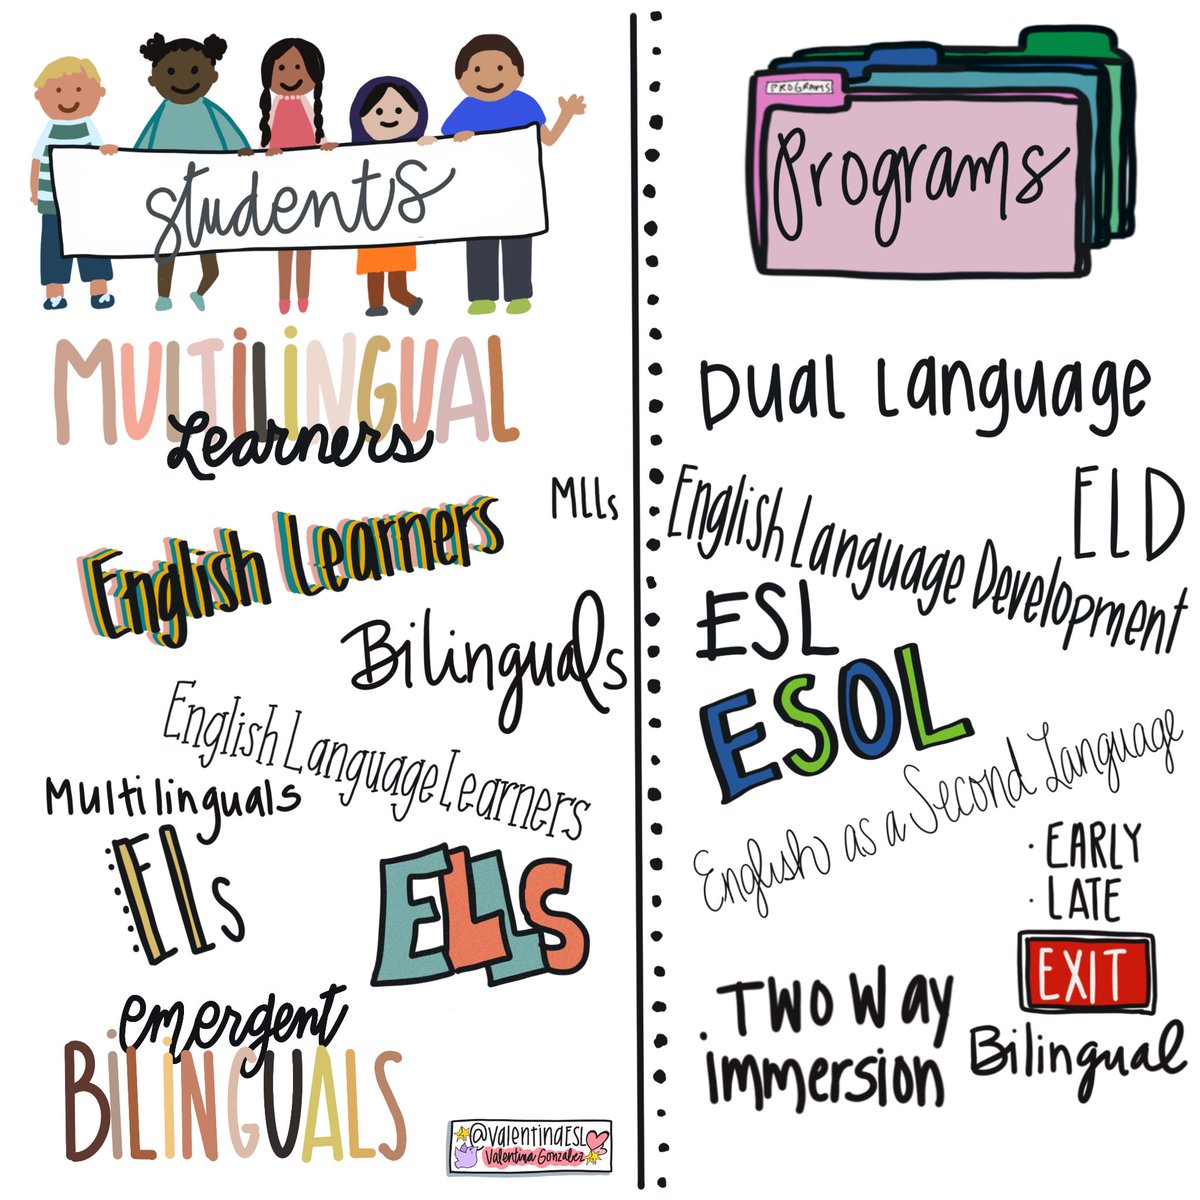 This is not a new graphic but it shows the difference between the terms used to describe the students v the programs they might participate in. ♥️ English learner has a heavy emphasis on a singular language and what students are unable to do to which some feel is deficit based.…